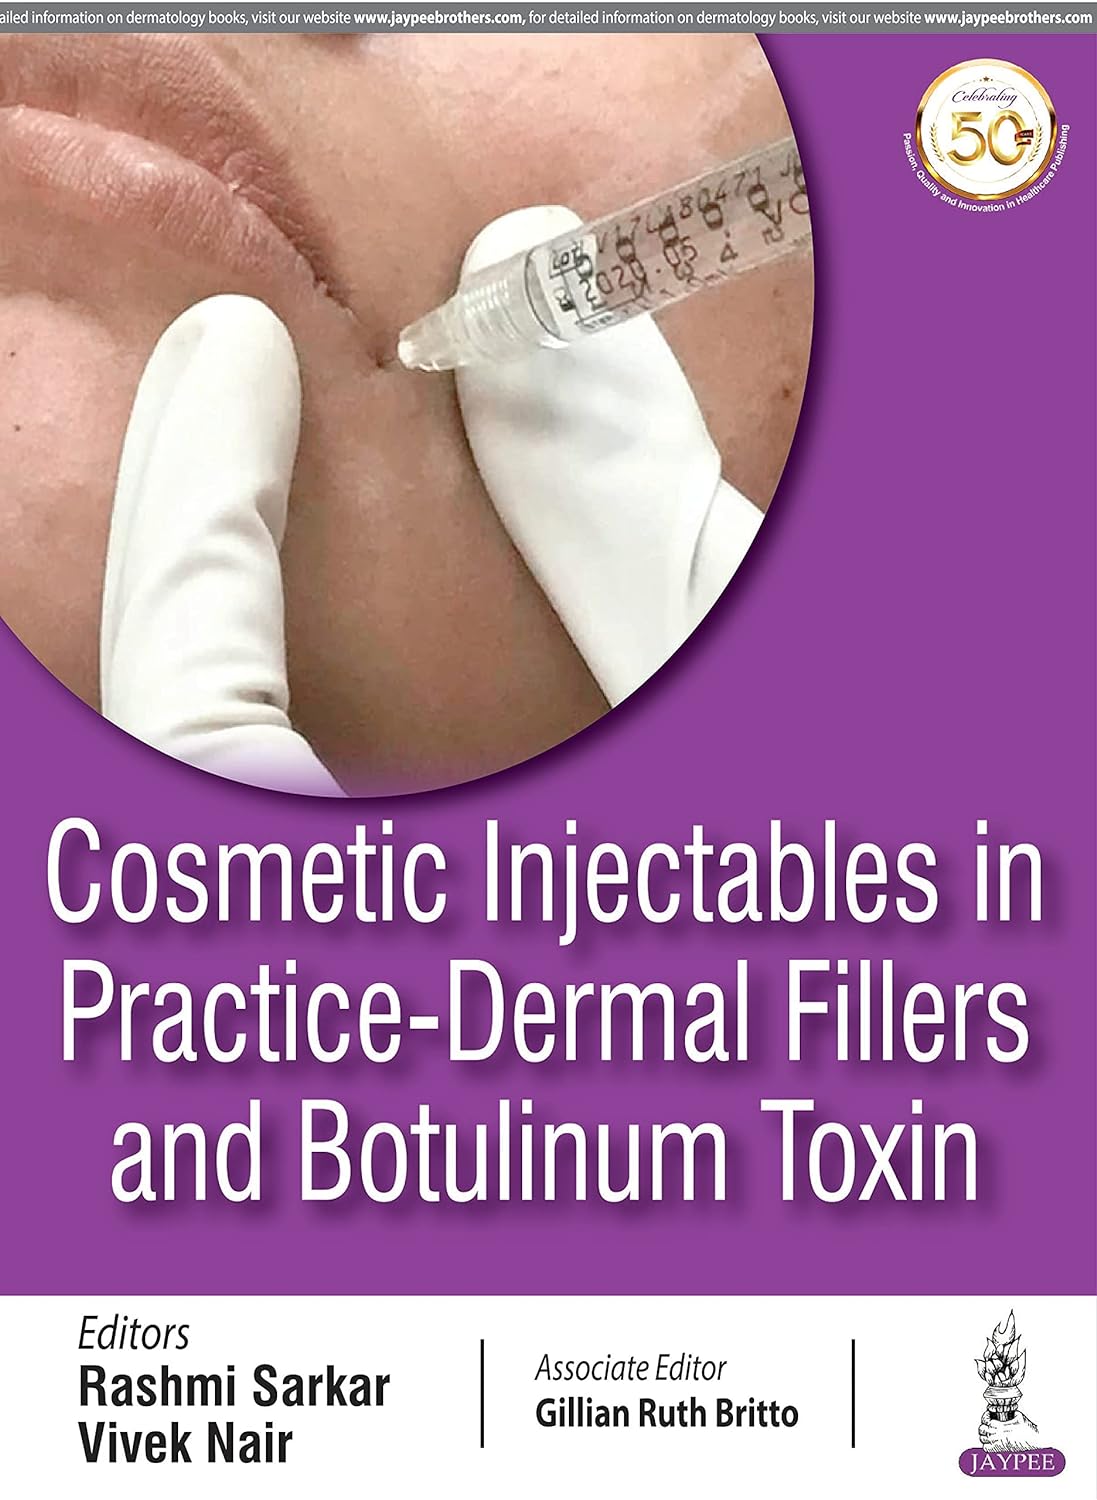 Cosmetic-Injectables-In-Practice-Dermal-Fillers-And-Botulinum-Toxin-1st-Edition-1.jpg